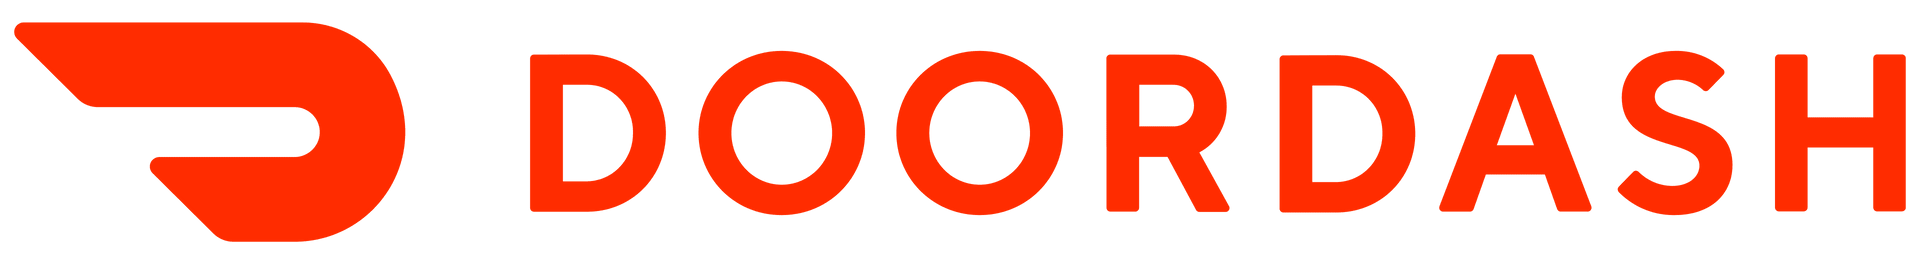 a red and white logo for doordash on a white background